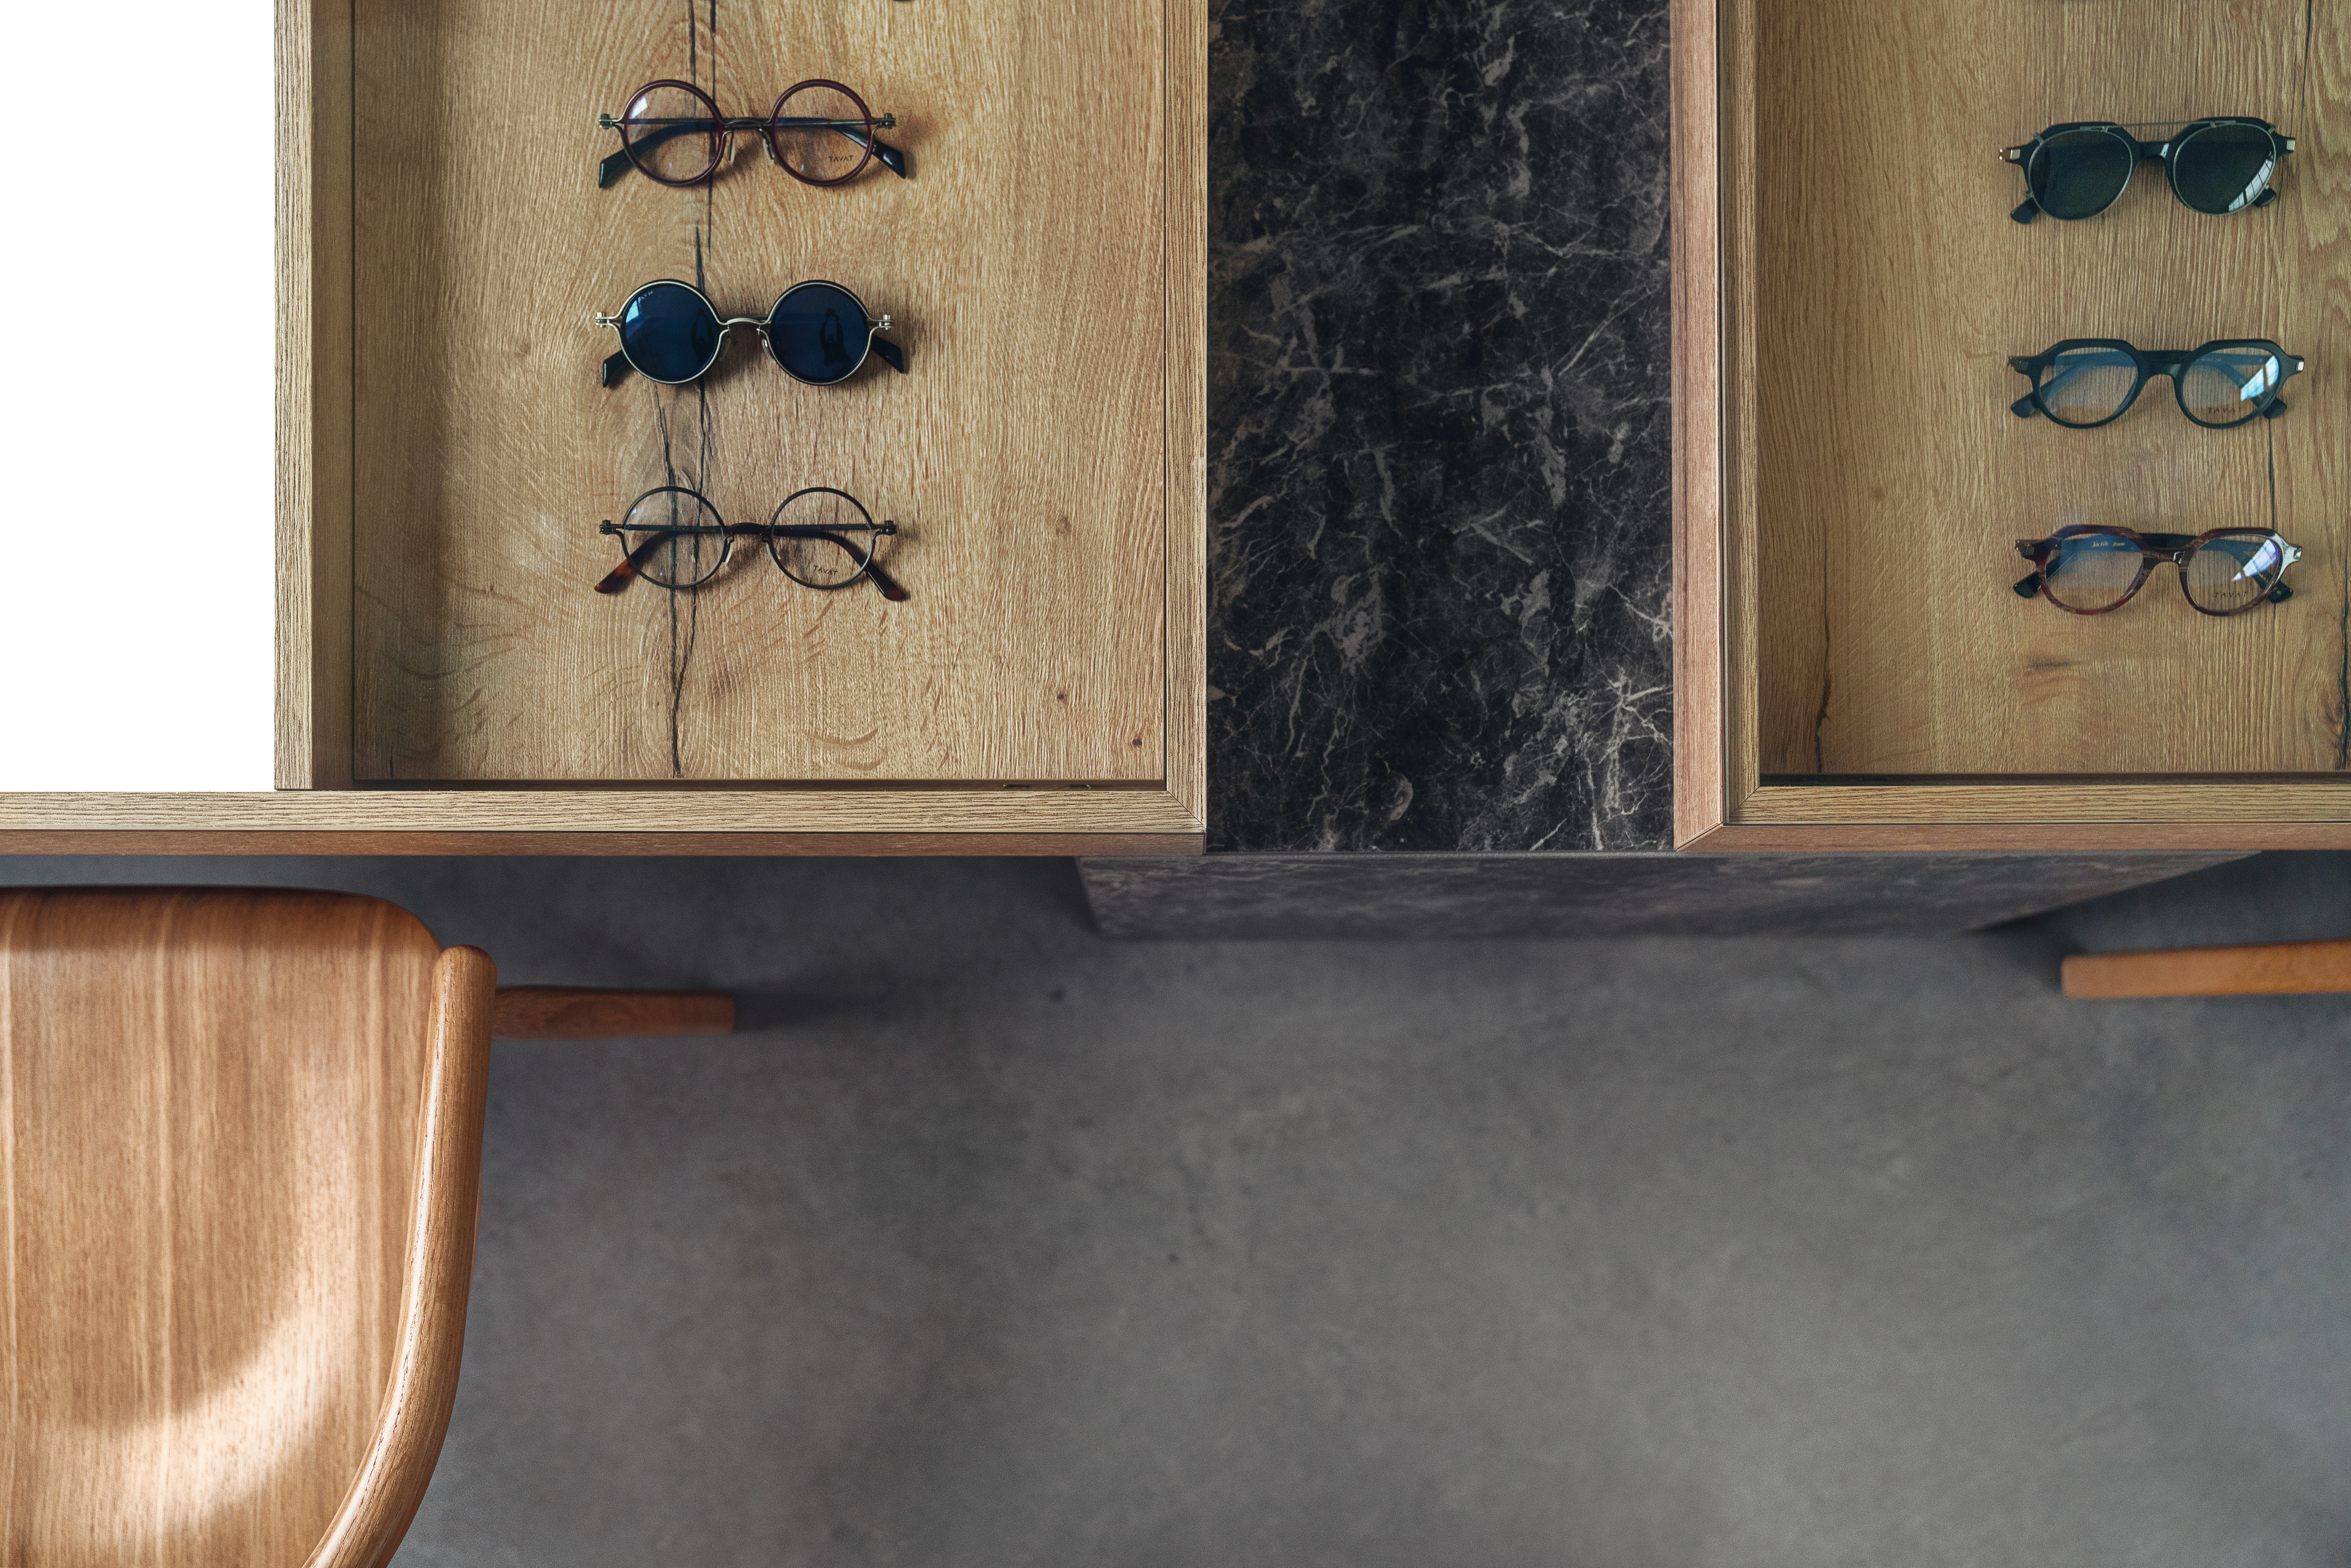 Clean contrasts: modern-looking glasses on the rustic Natural Halifax Oak.